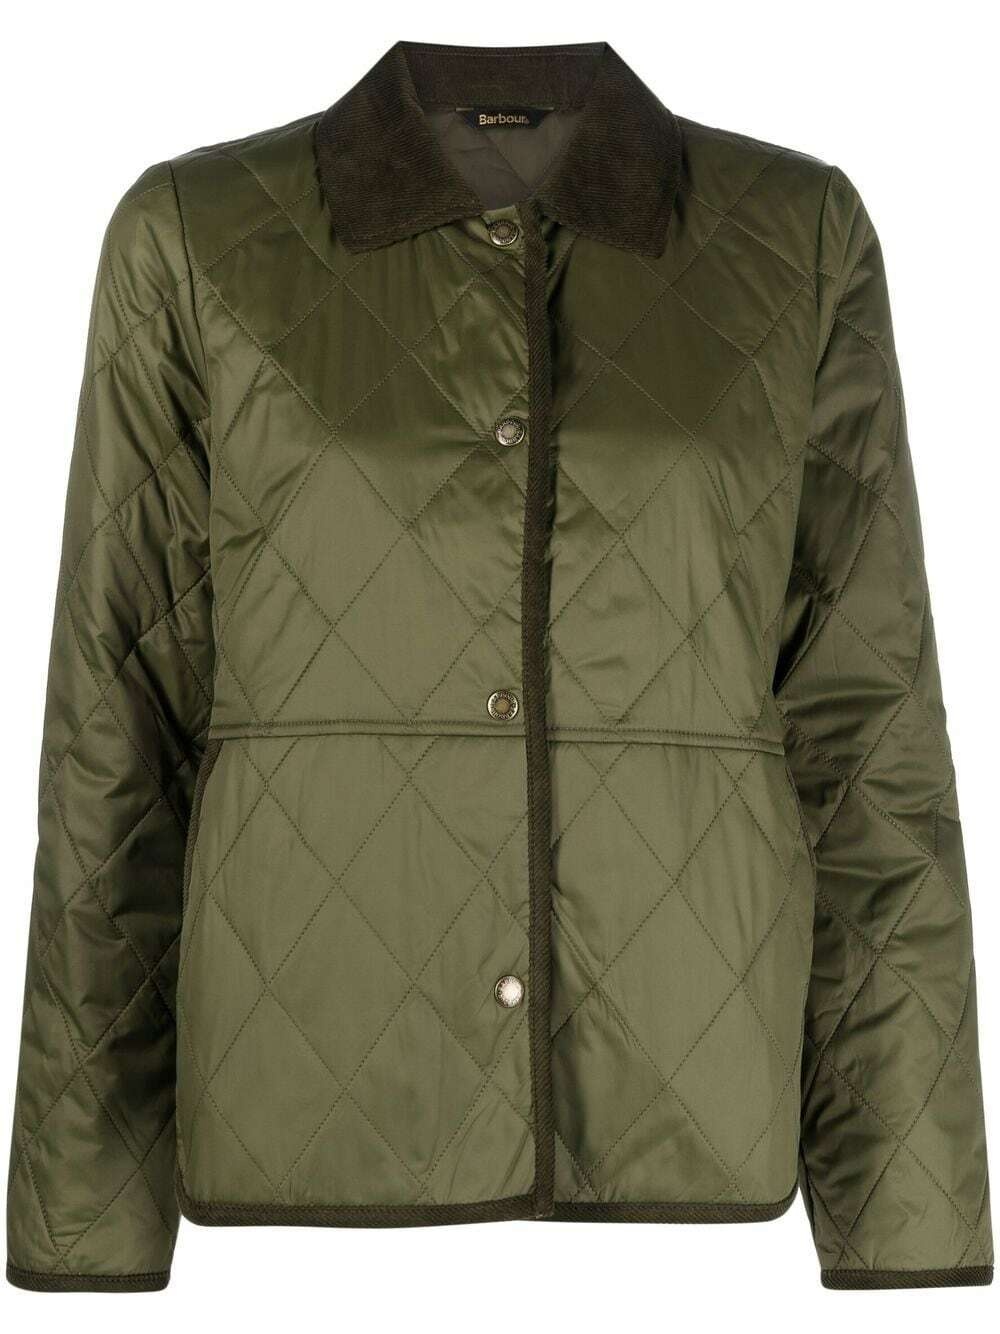 BARBOUR - Jacket With Logo Barbour